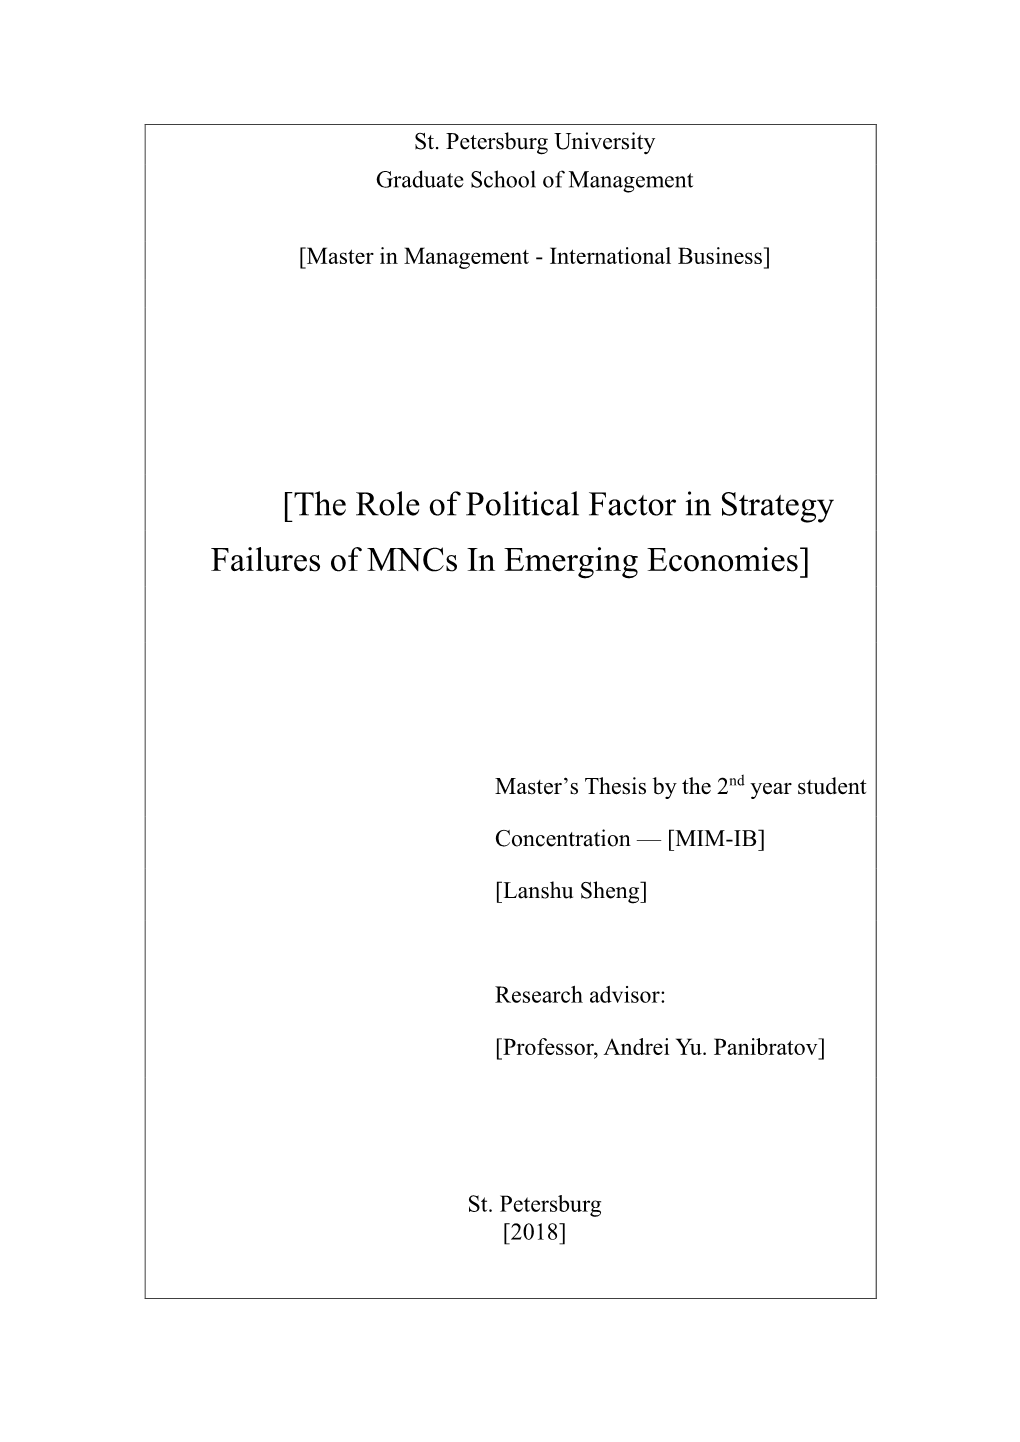 The Role of Political Factor in Strategy Failures of Mncs in Emerging Economies]